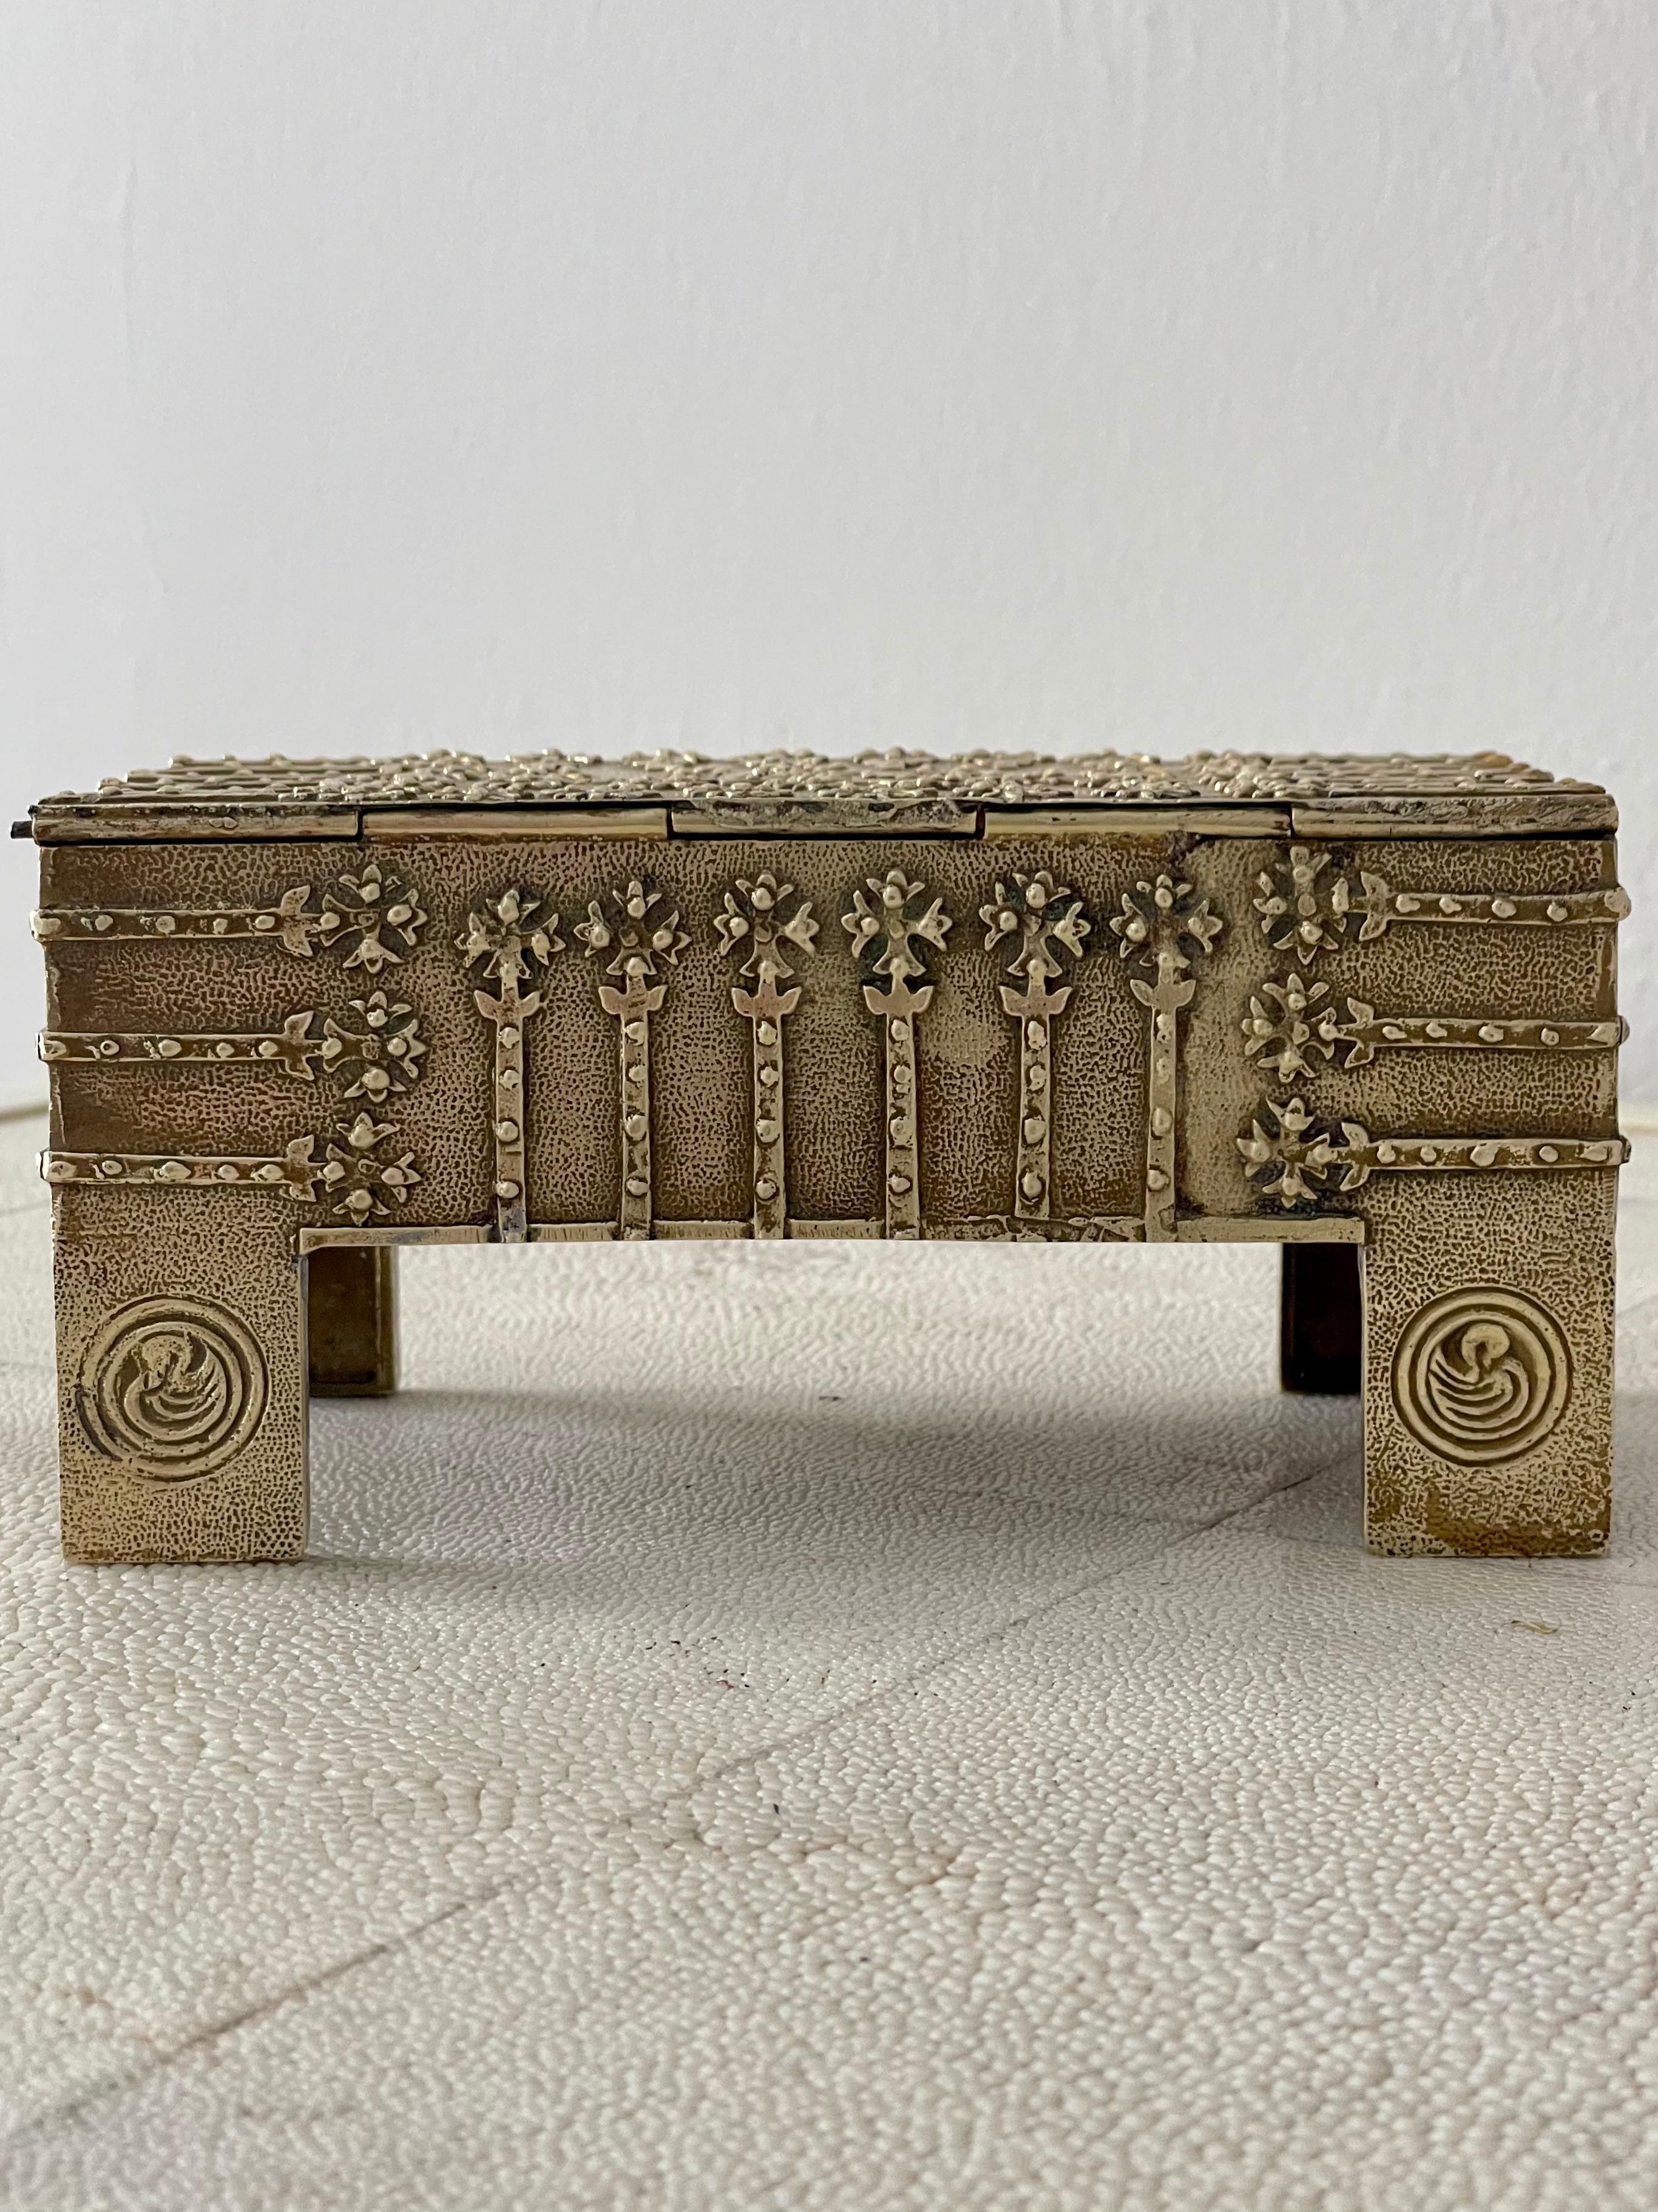 Brutalist Hammered Brass Box or Jewelry Casket For Sale 10